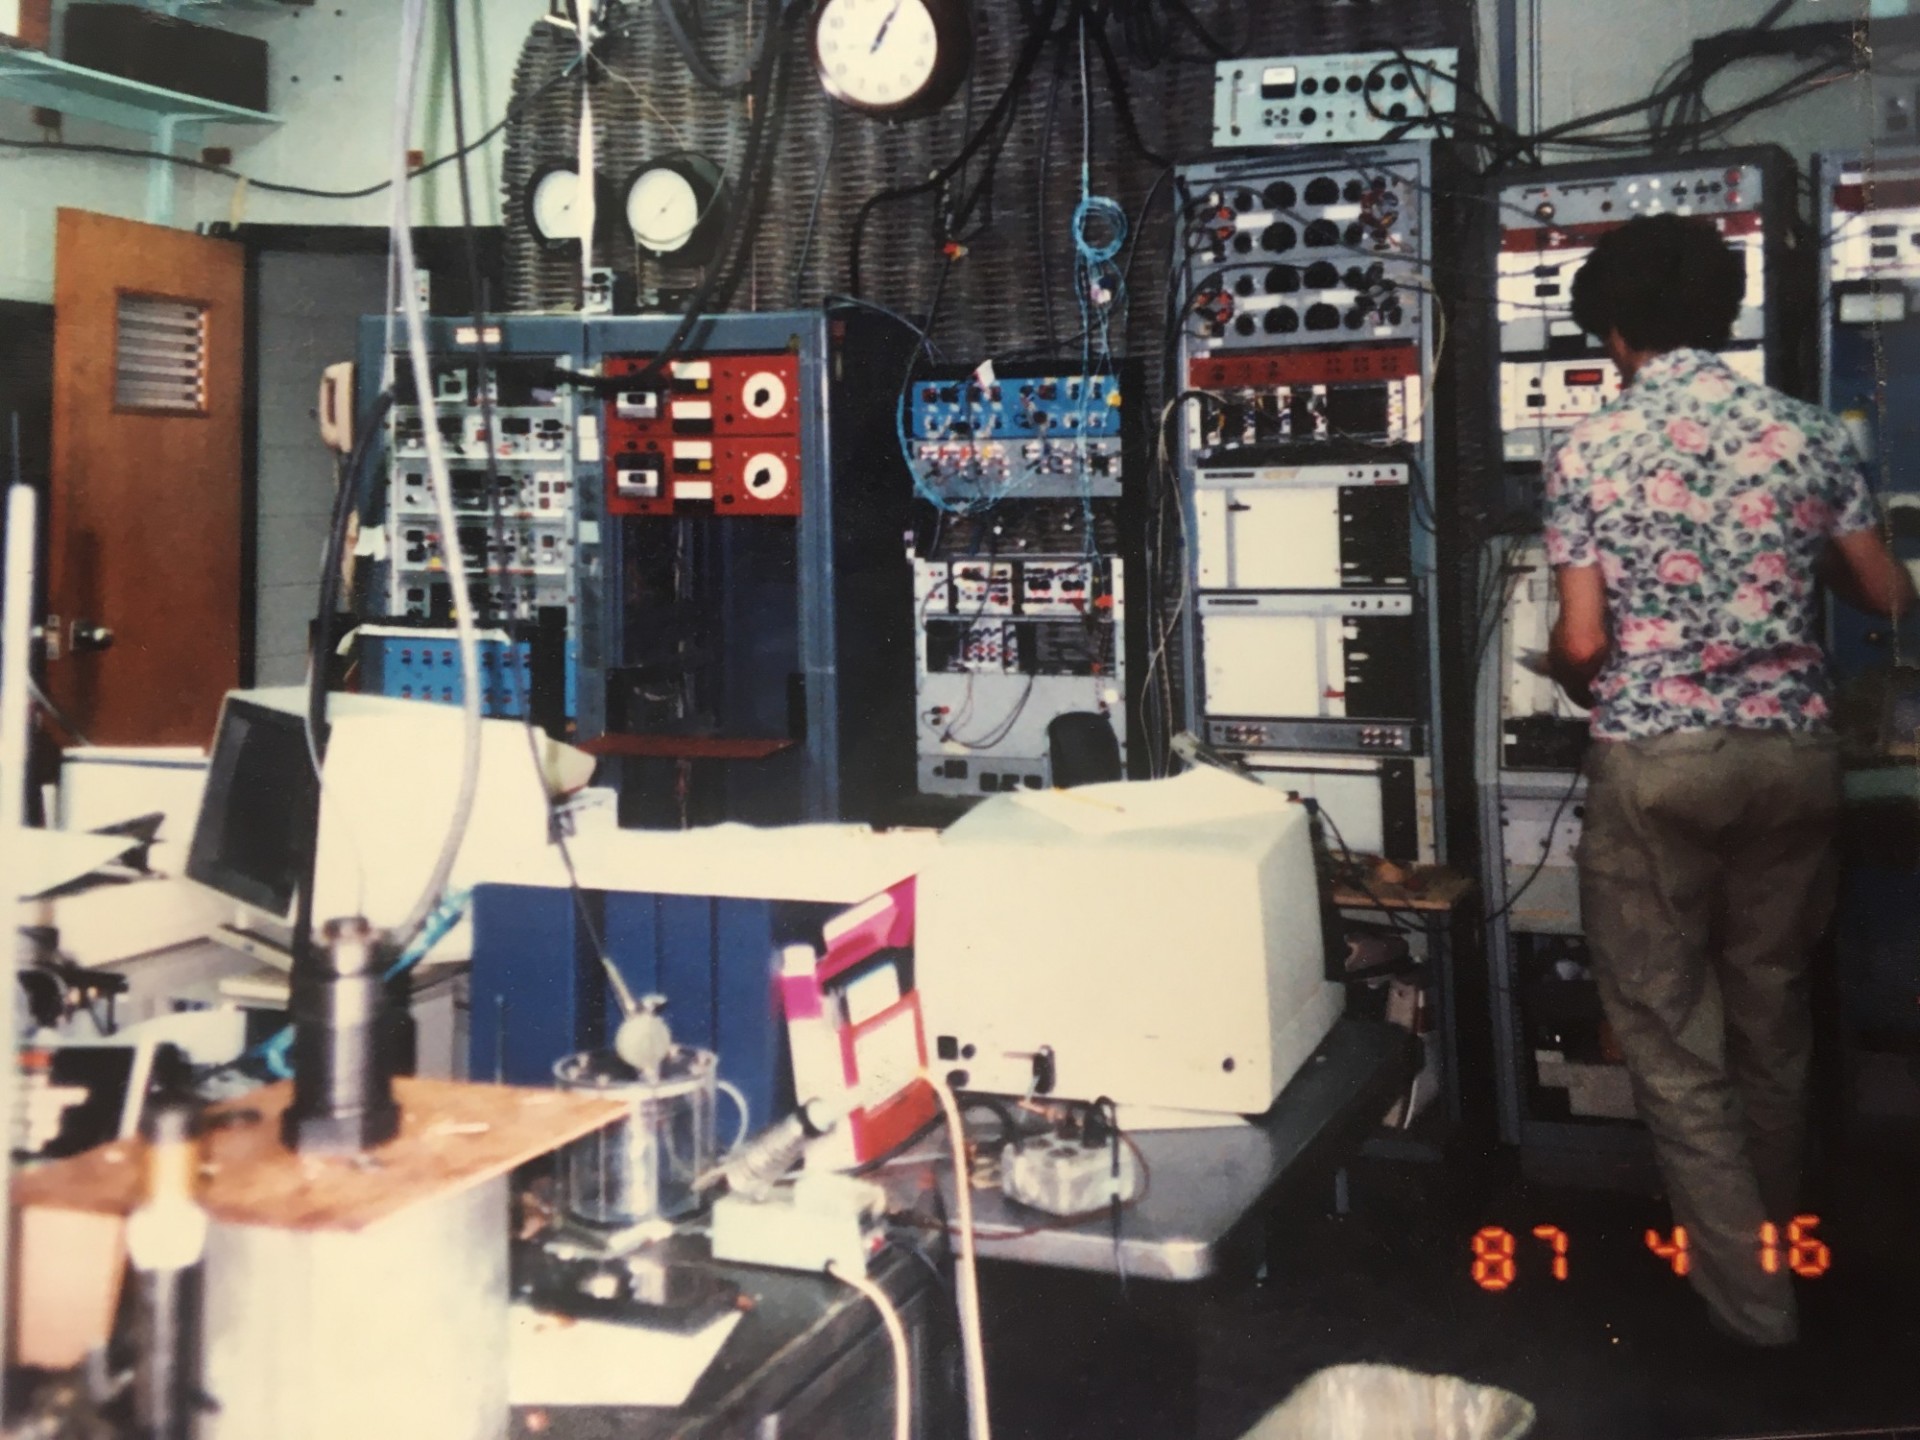 Chris Marone works the controls (are those chart recorders?) on one of the triaxial apparatuses (1987).